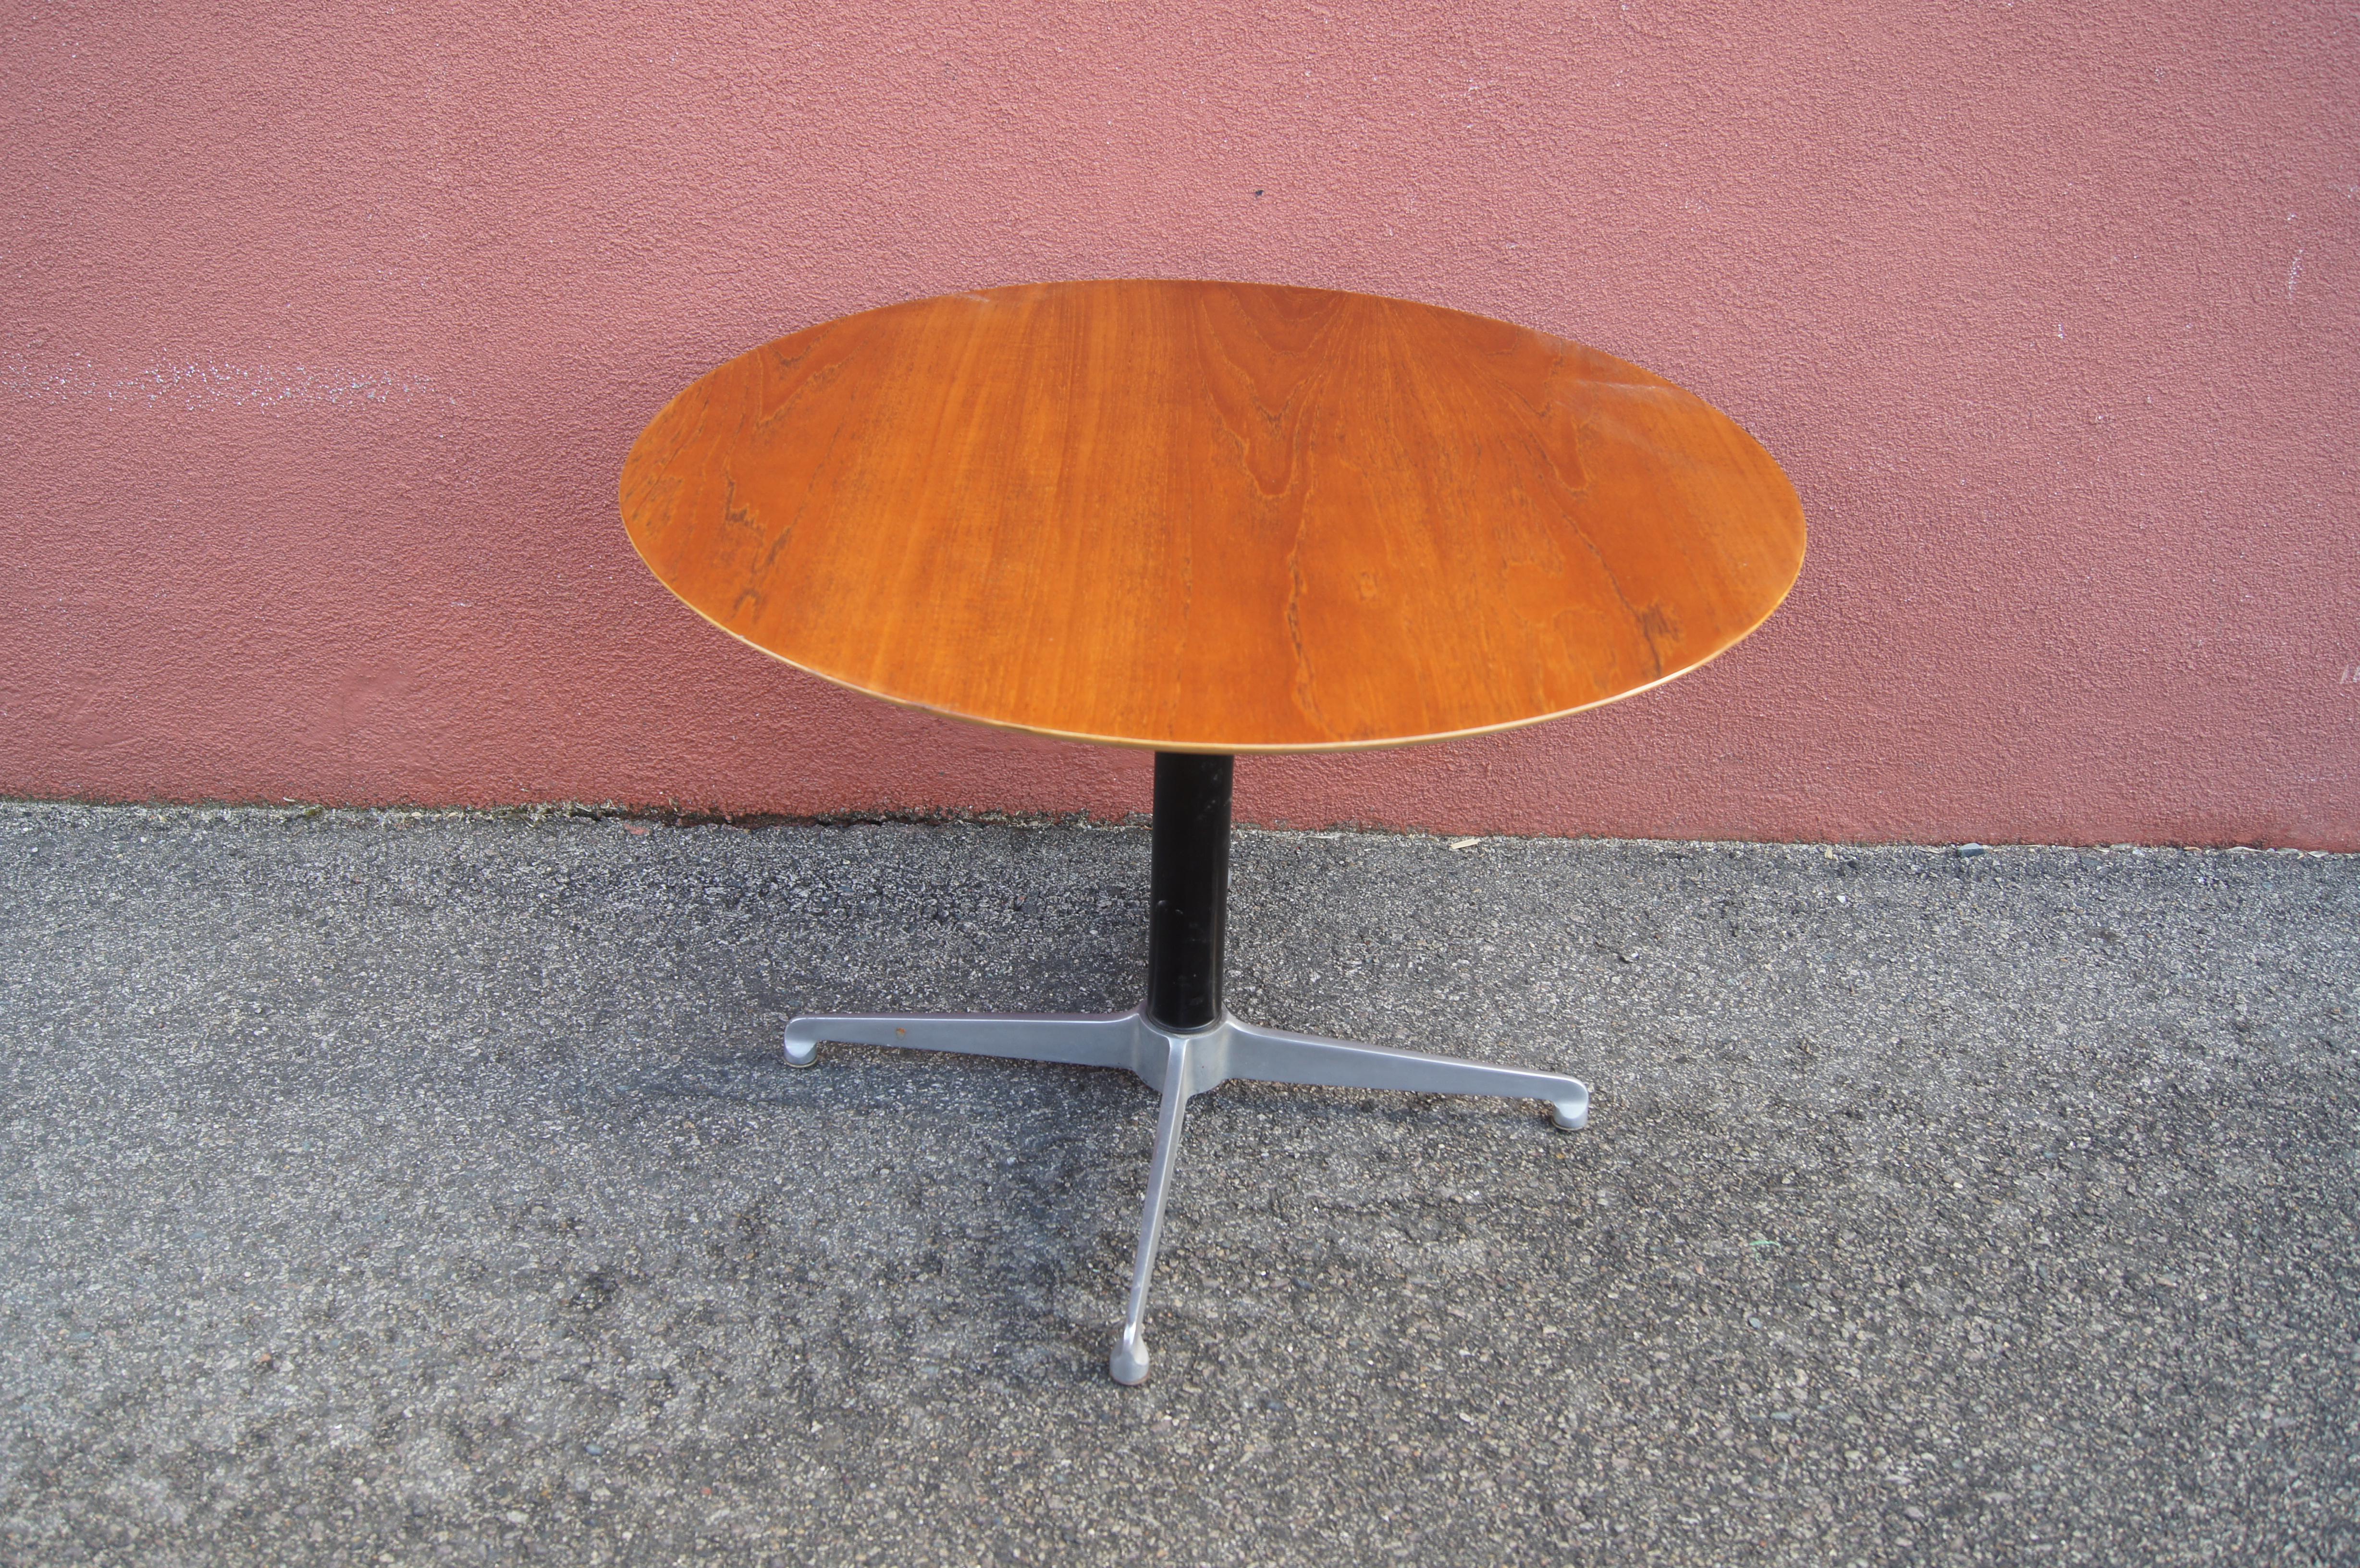 This Danish table has a round teak top on a four-star pedestal base. The height easily adjusts from 16.25 inches to 26.5, allowing it to be used as a small coffee table or as a side table.